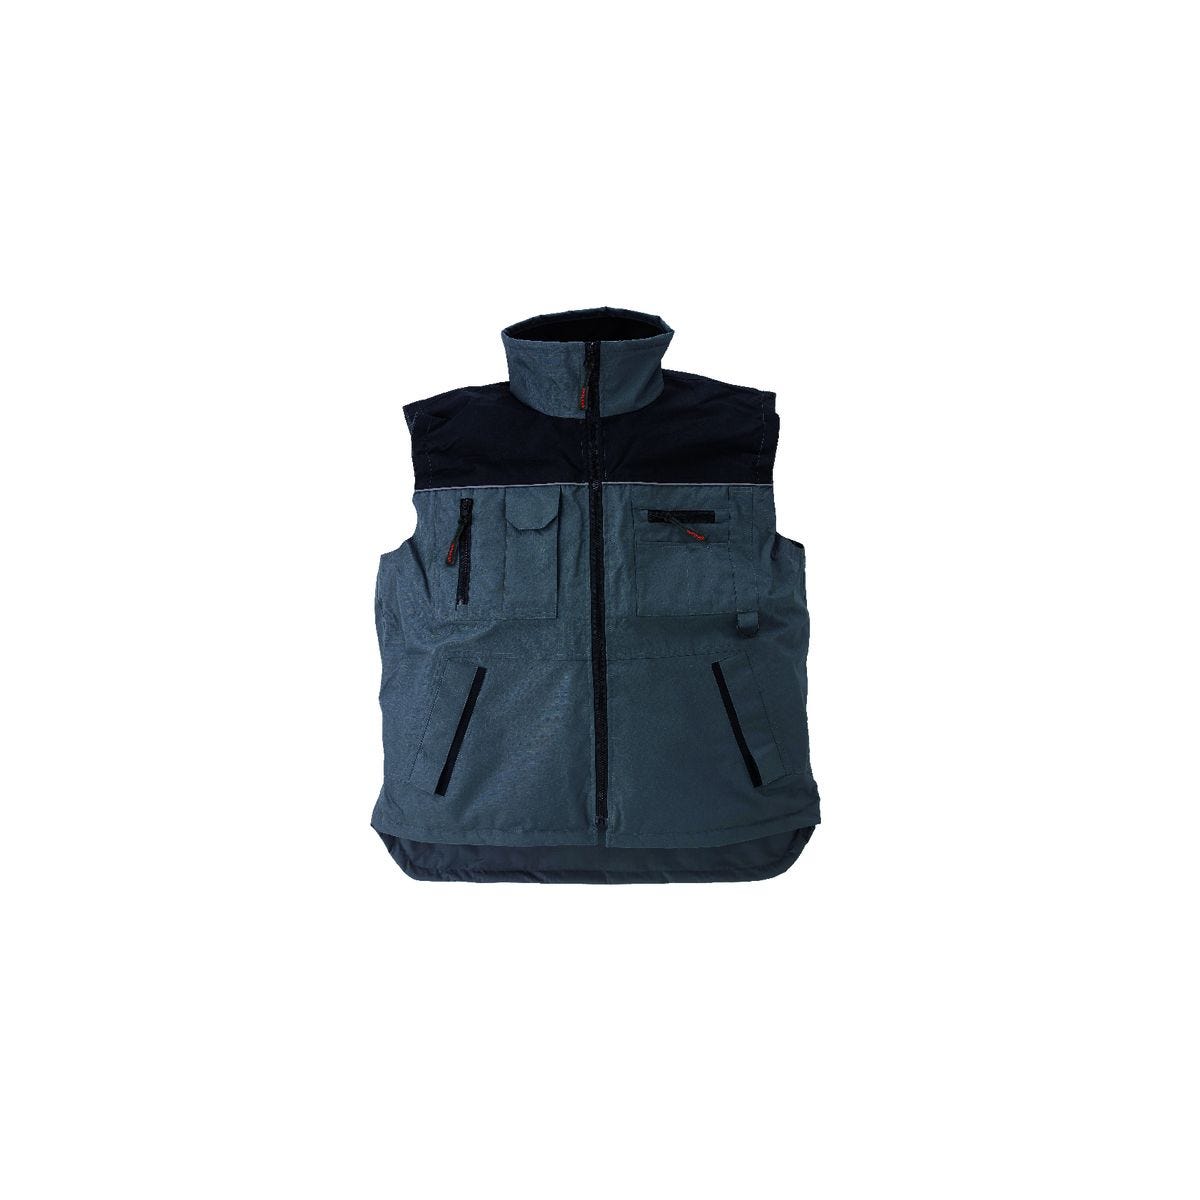 RIPSTOP Gilet Froid gris/noir, Polyester Ripstop + Polaire 280g/m² - COVERGUARD - Taille M 0